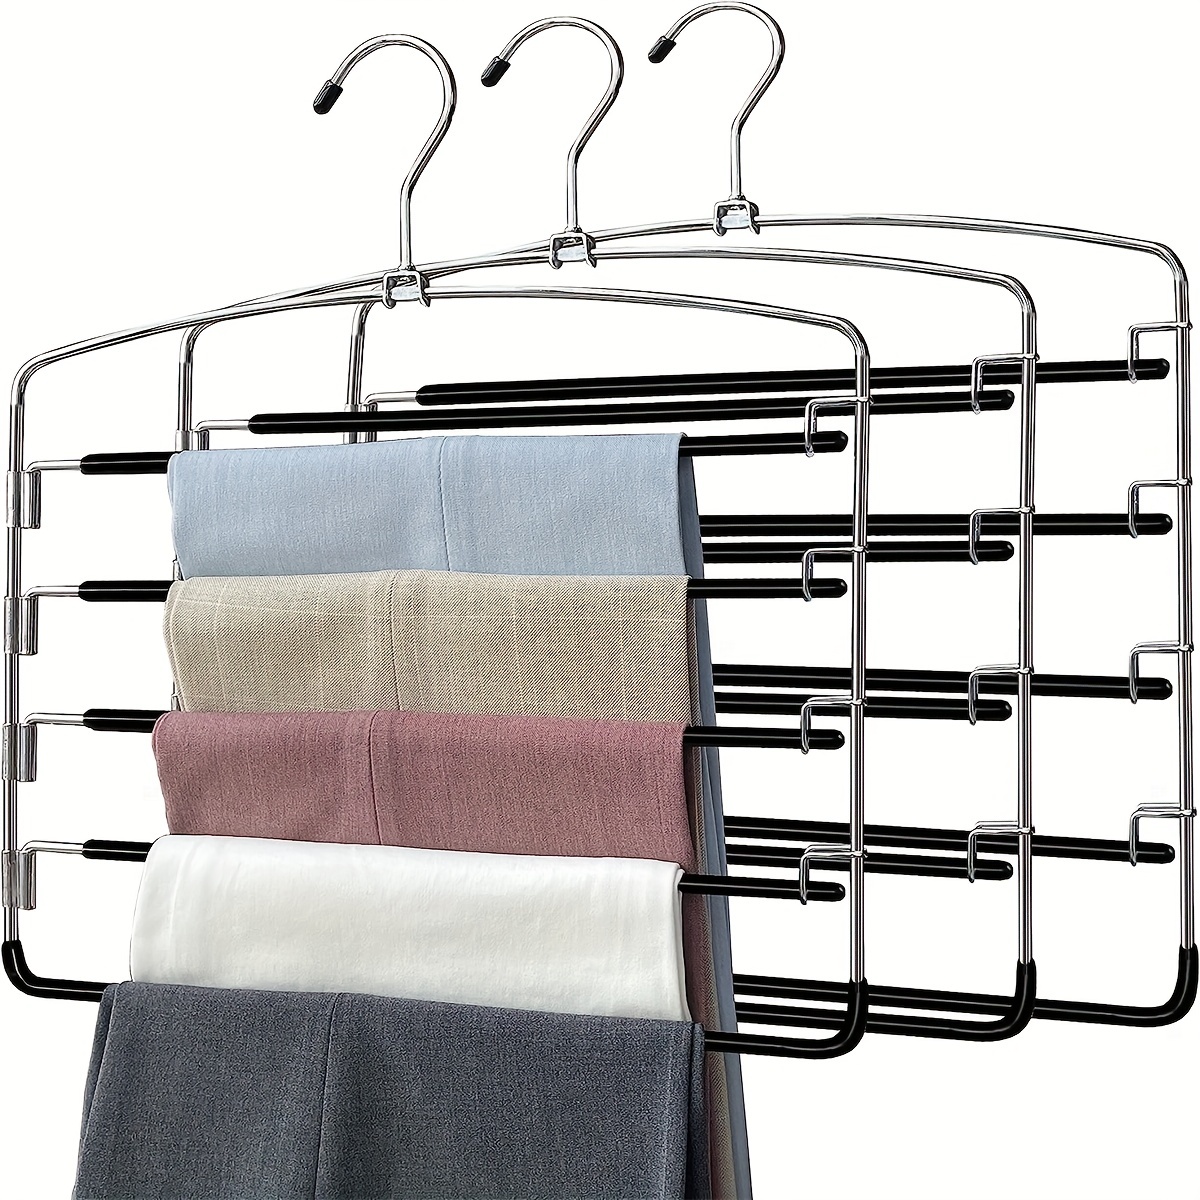 

1pc 5-tier No-slip Metal Pants Hanger, Durable Clothes Rack For Ties, Pants, Scarves, Household Space Saving Organizer For Closet, Wardrobe, Home, Dorm